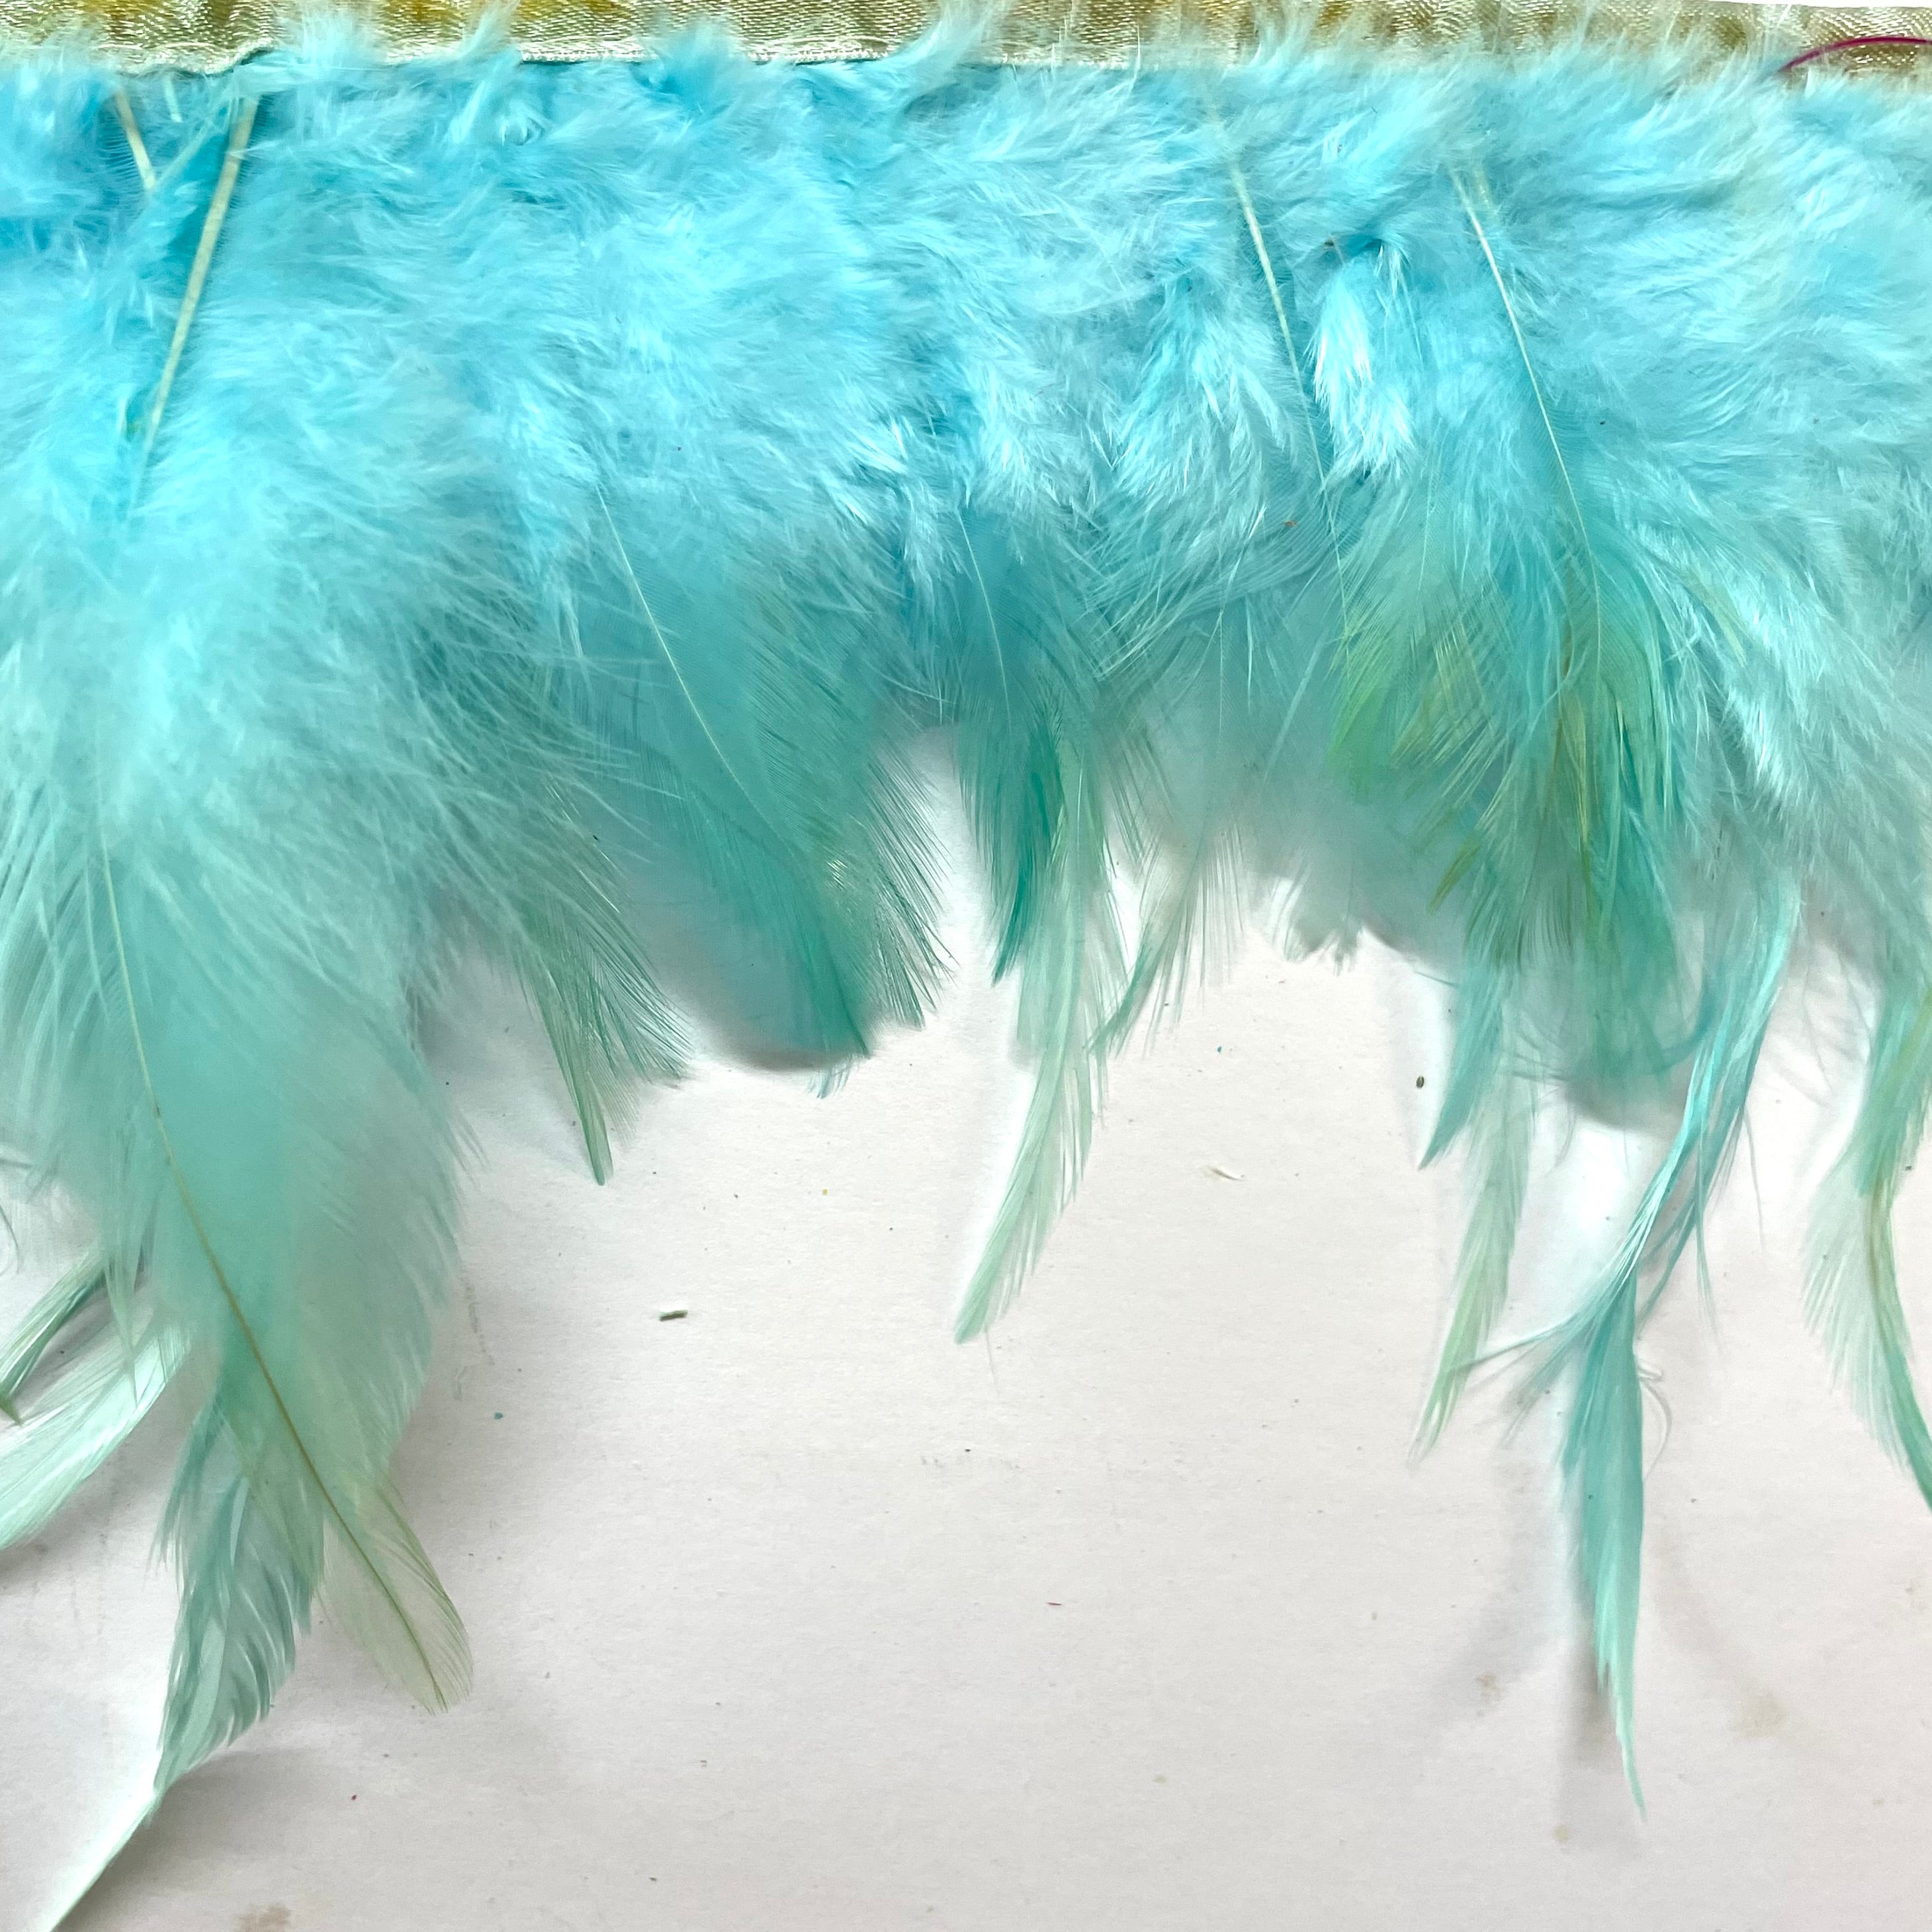 Hackle Saddle Rooster Feather RIBBON Strung per metre - Ice Blue